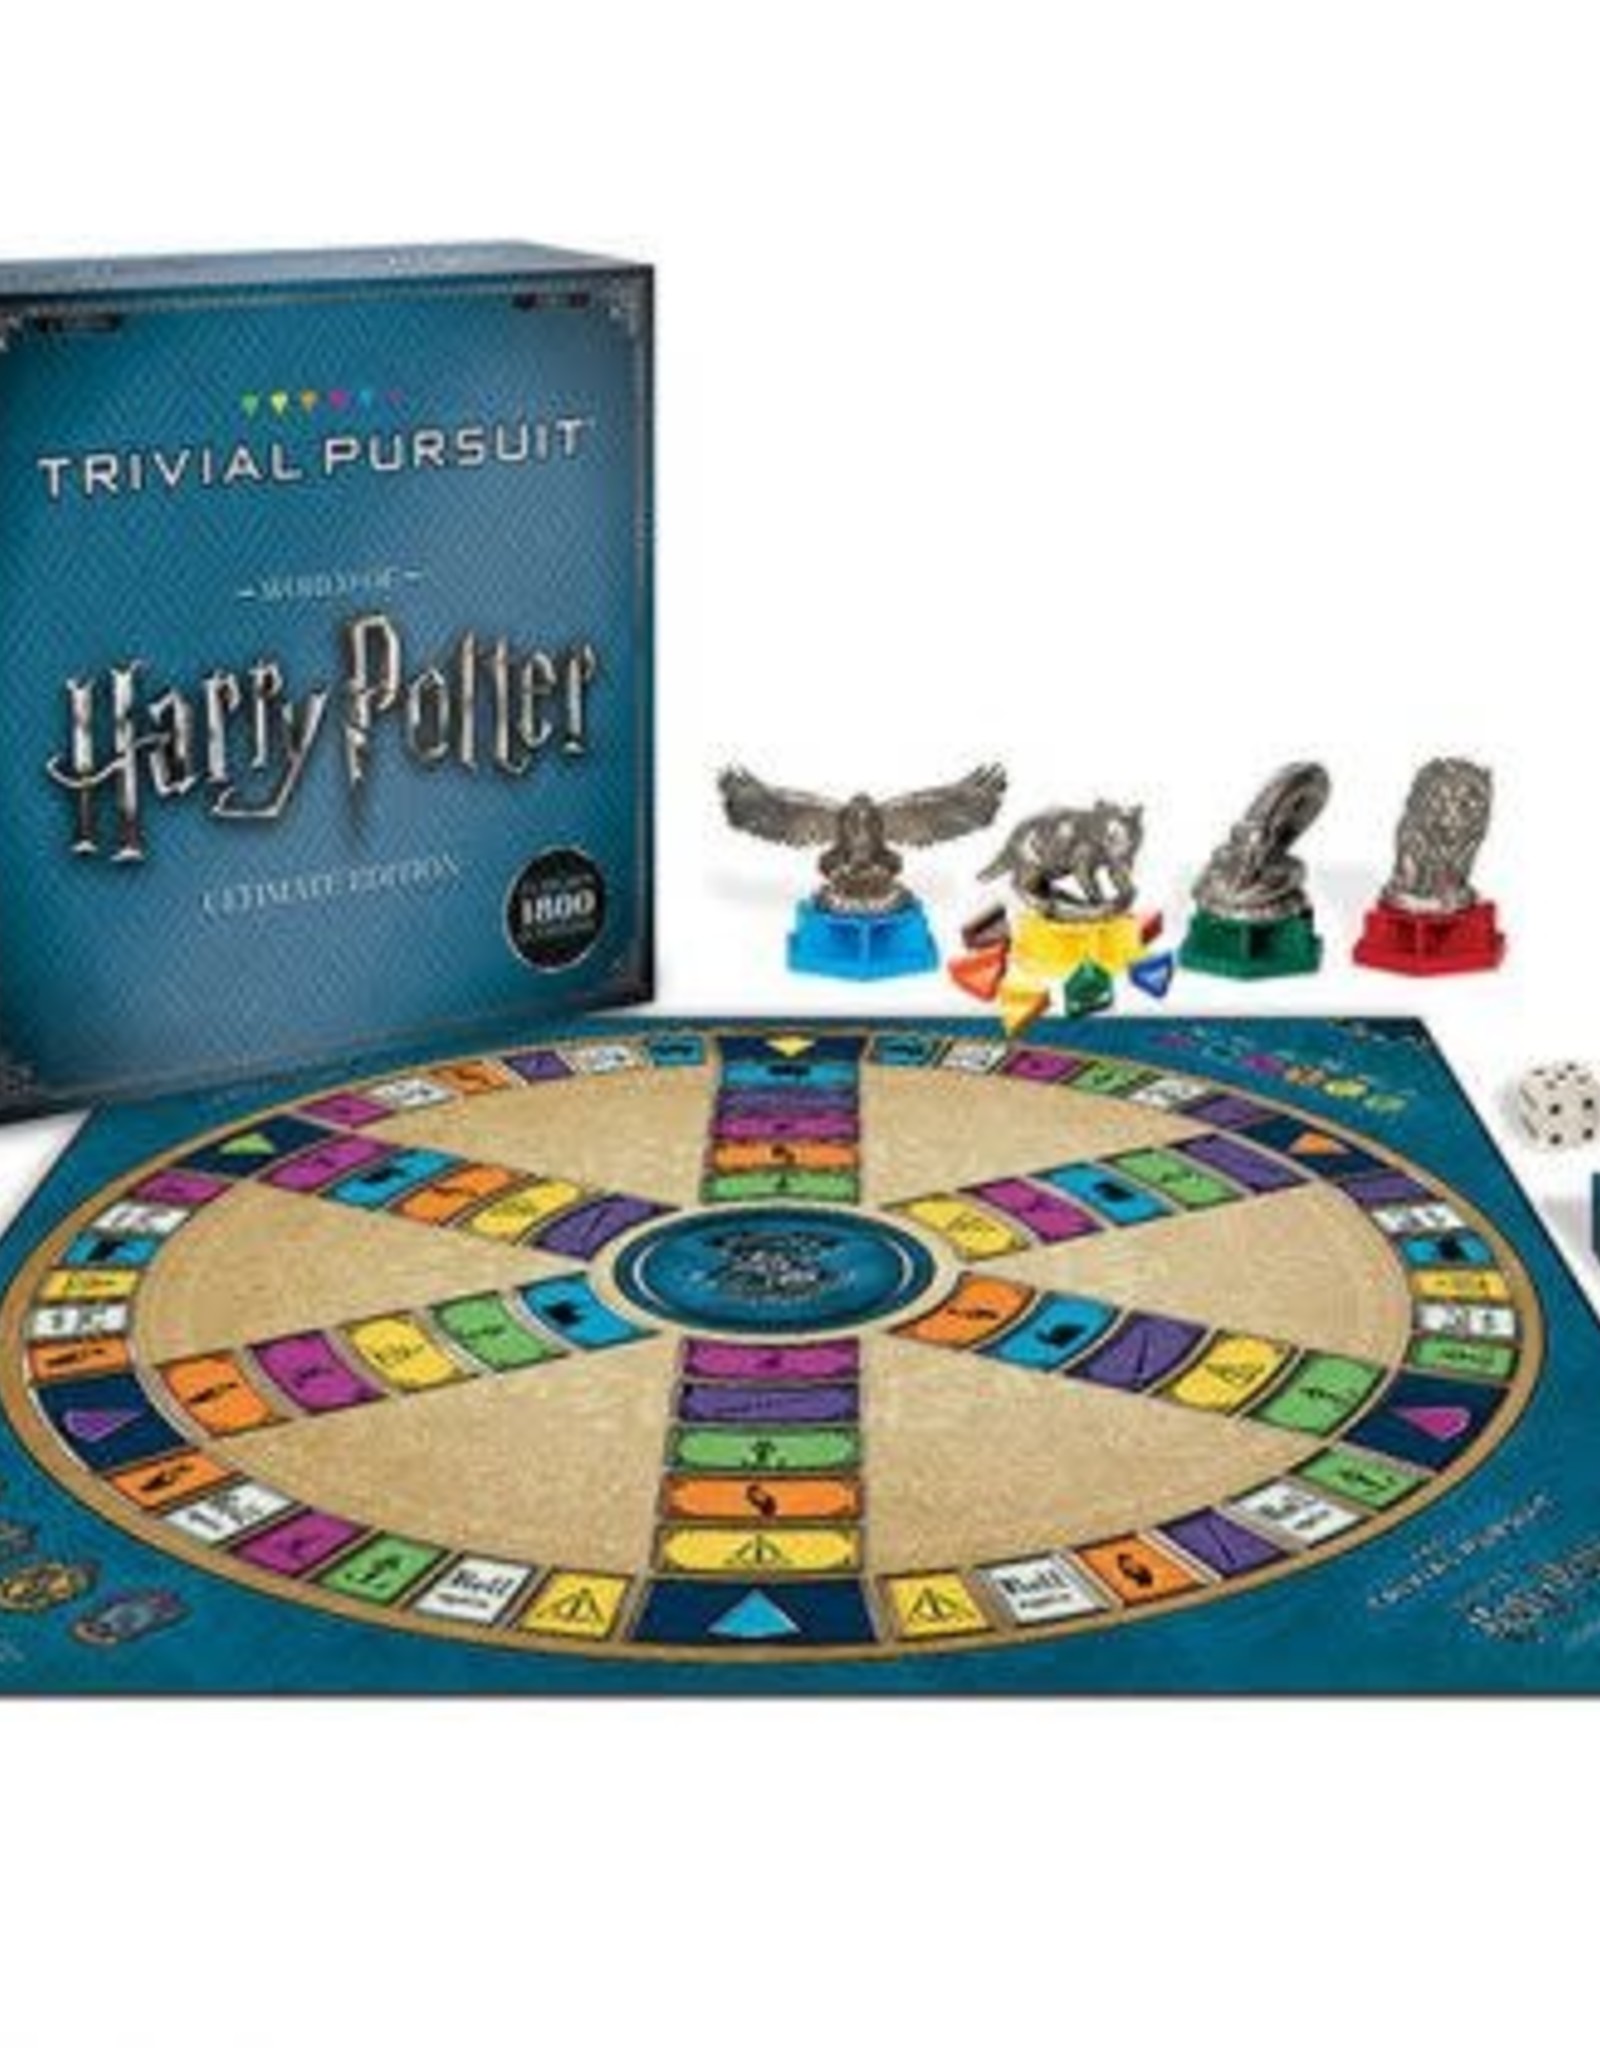 USAopoly Trivial Pursuit: Harry Potter Ultimate Edition